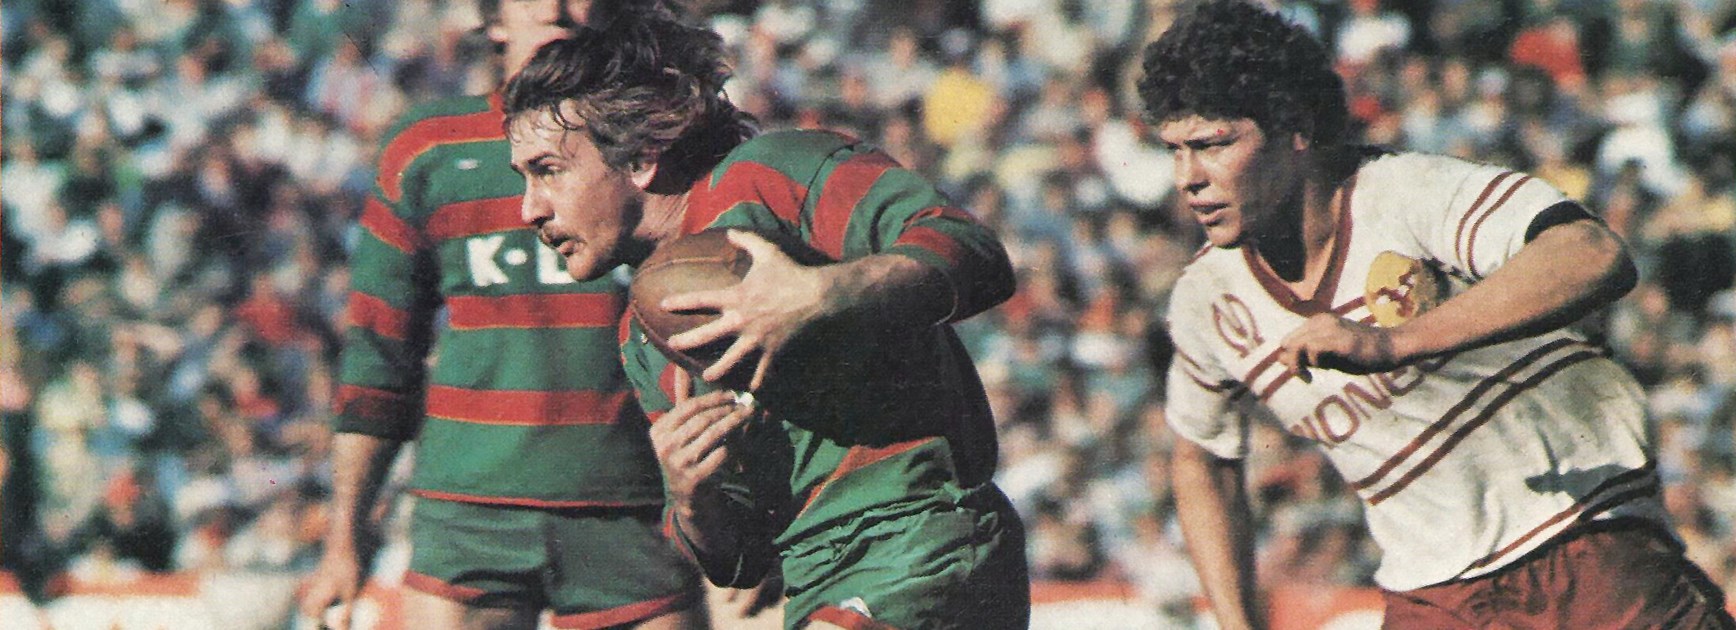 Rabbitohs five-eighth Robert 'Rocky' Laurie.